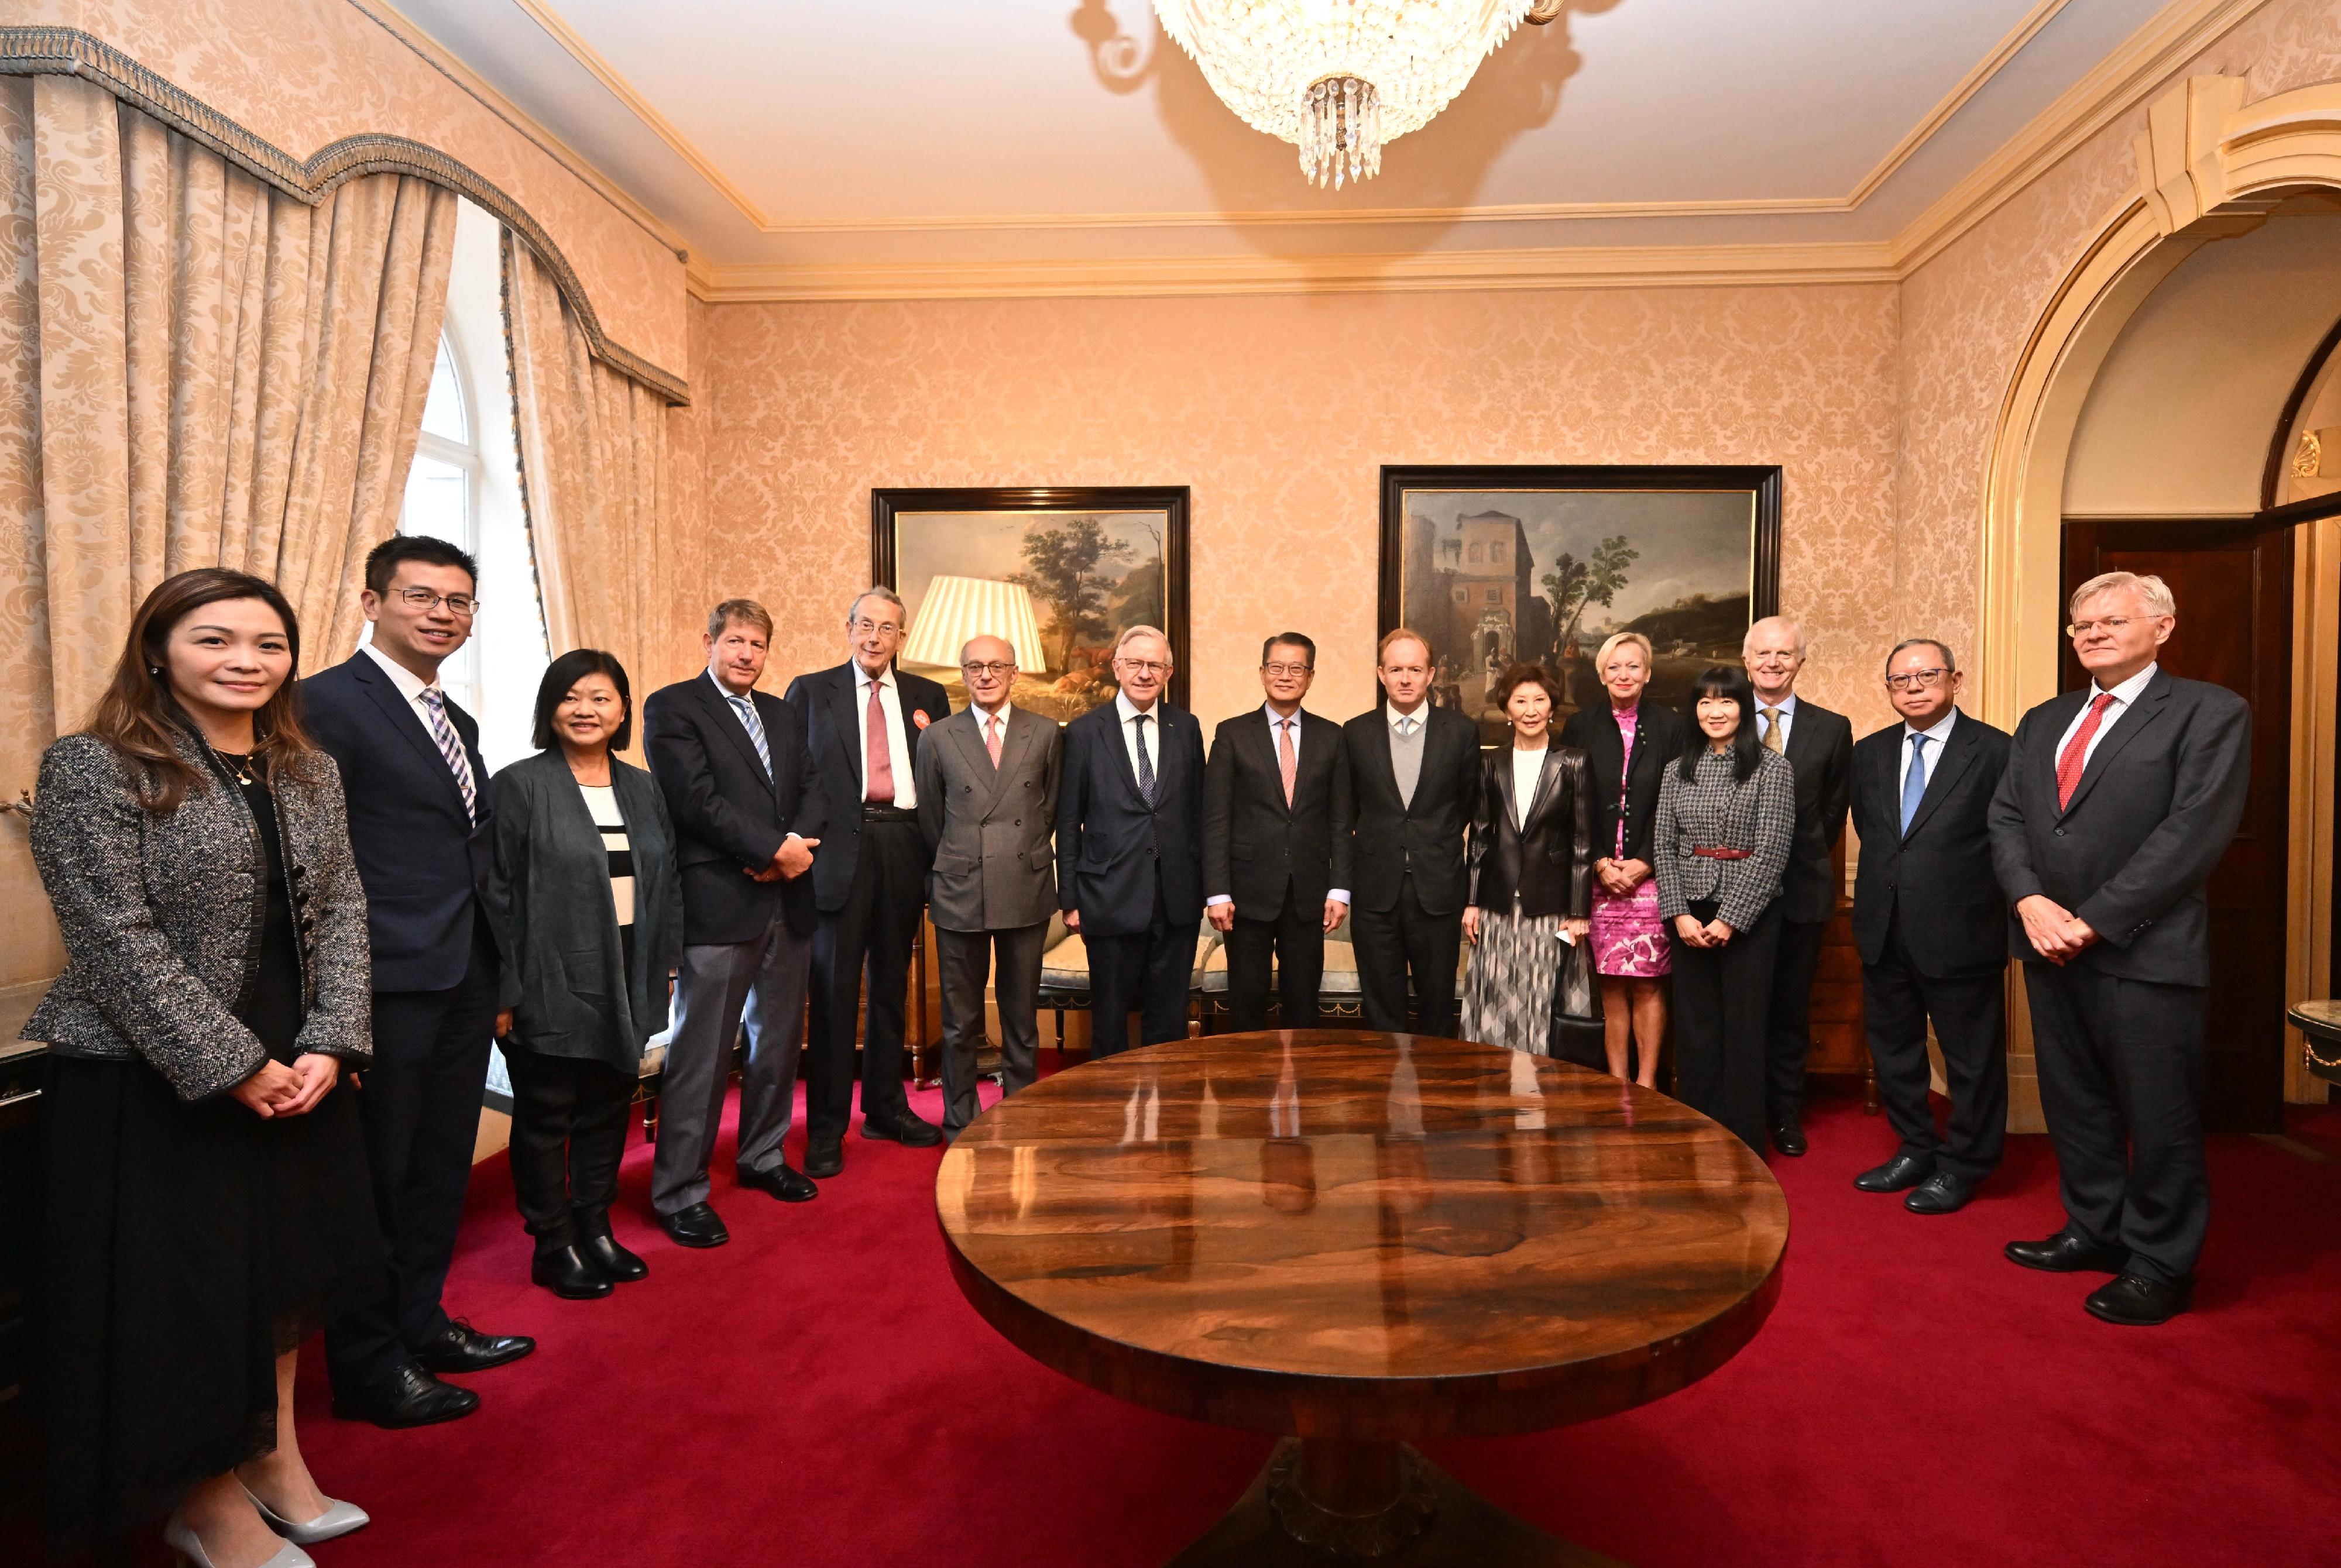 The Financial Secretary, Mr Paul Chan, yesterday (September 21, London time) continued his visit programme in London. Photo shows Mr Chan (eighth right); the Chairman of the Hong Kong Trade Development Council, Dr Peter Lam (second right); and Special Representative for Hong Kong Economic and Trade Affairs to the European Union, Miss Shirley Yung (third left), and the Director-General of the Hong Kong Economic and Trade Office, London, Mr Gilford Law (second left), in a group photo with members of the Hong Kong Association committee at the luncheon.